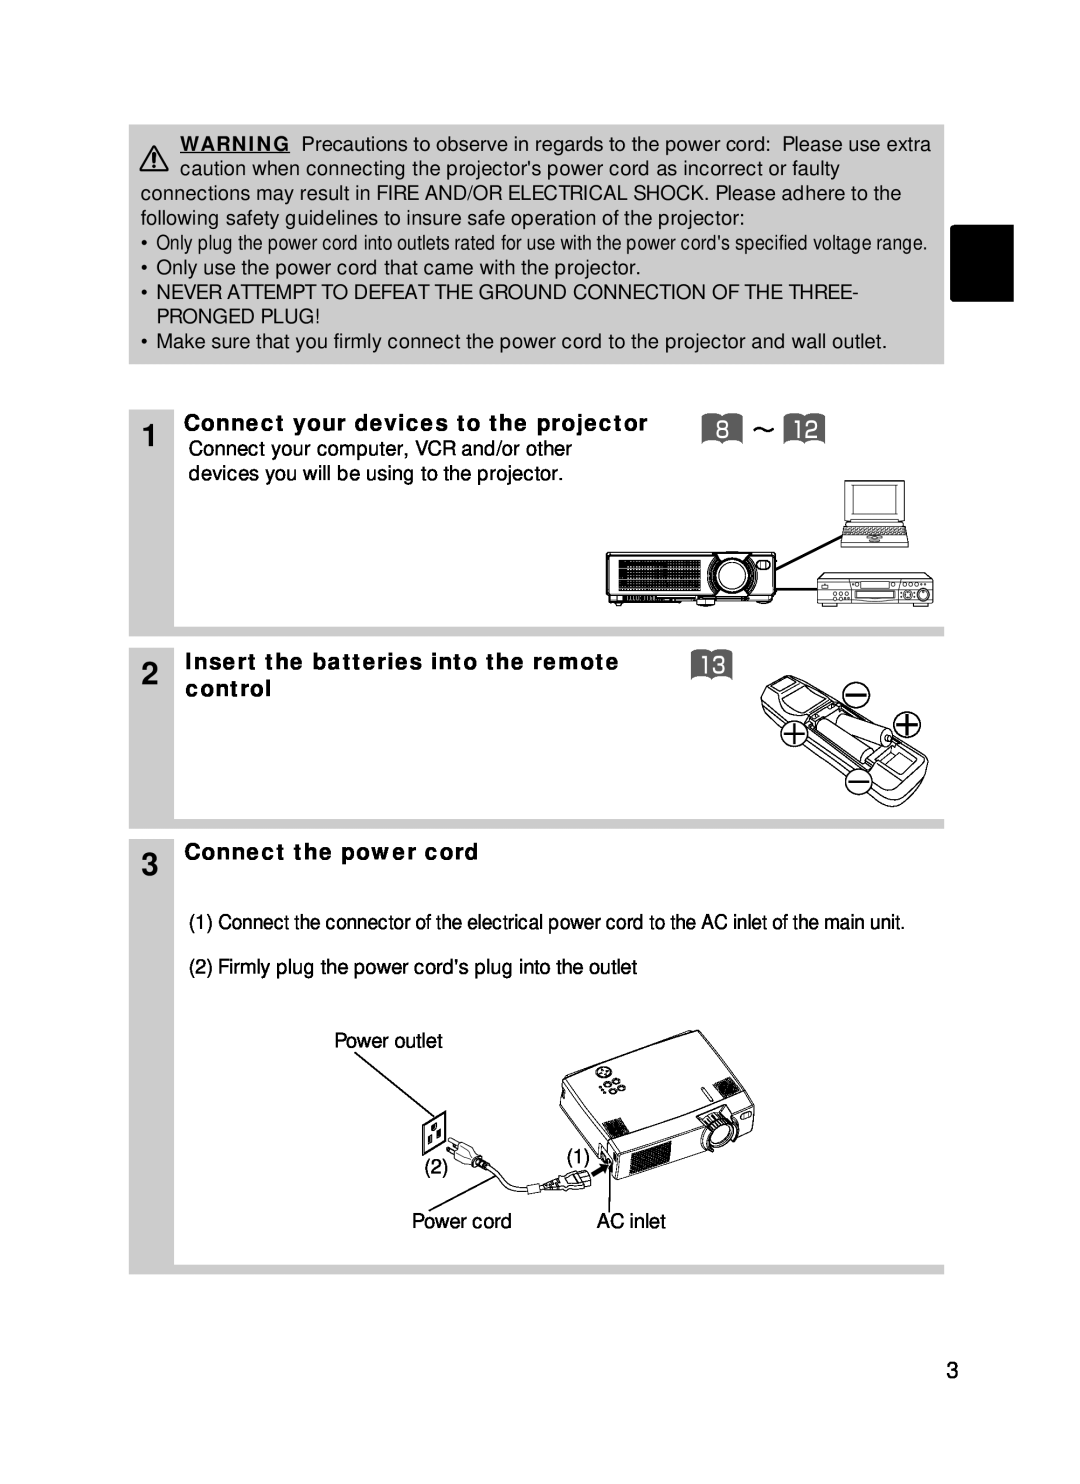 Hitachi CPX385W user manual Connect your devices to the projector, Insert the batteries into the remote, control 